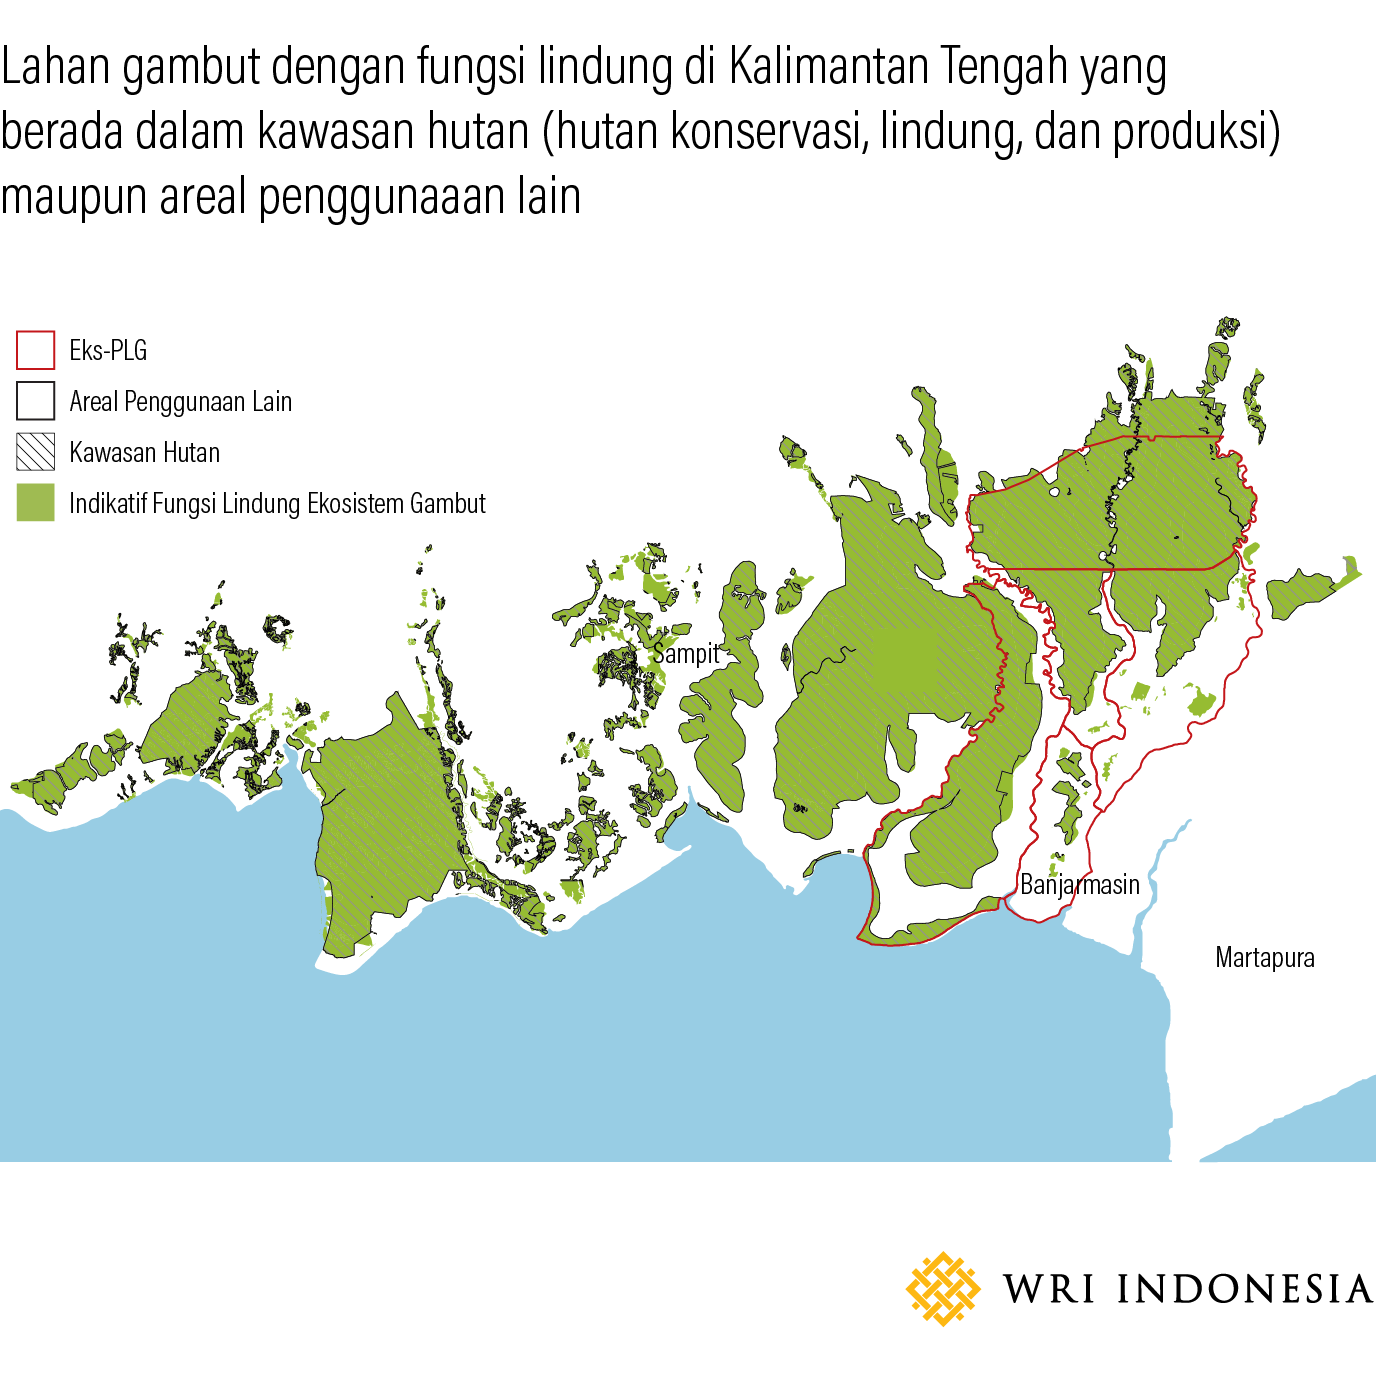 Peatland with protected function in Central Kalimantan. Source: Ministry of Environment and Forestry (KLHK, 2019.